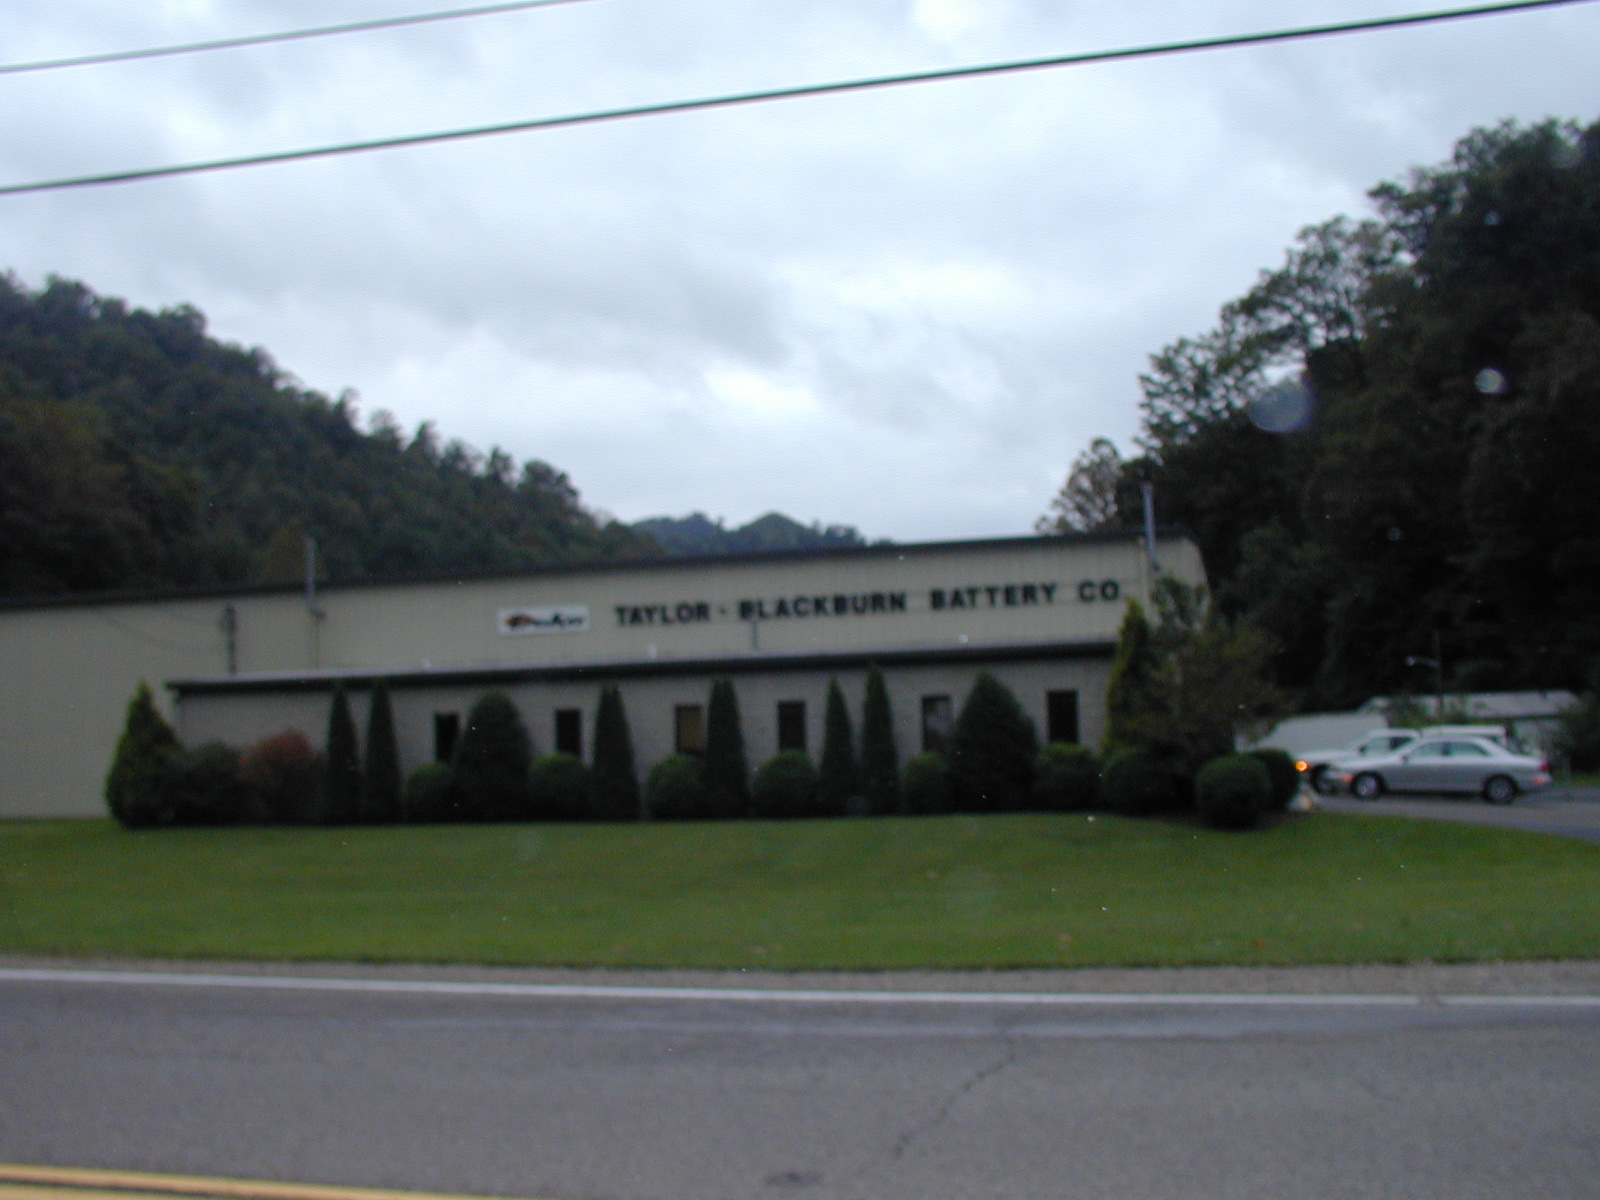 Taylor and Blackburn is located in Hernshaw, West Virginia. They has worked with the state of West Virginia by offering automotive and equpment batteries for the past 25 years. 